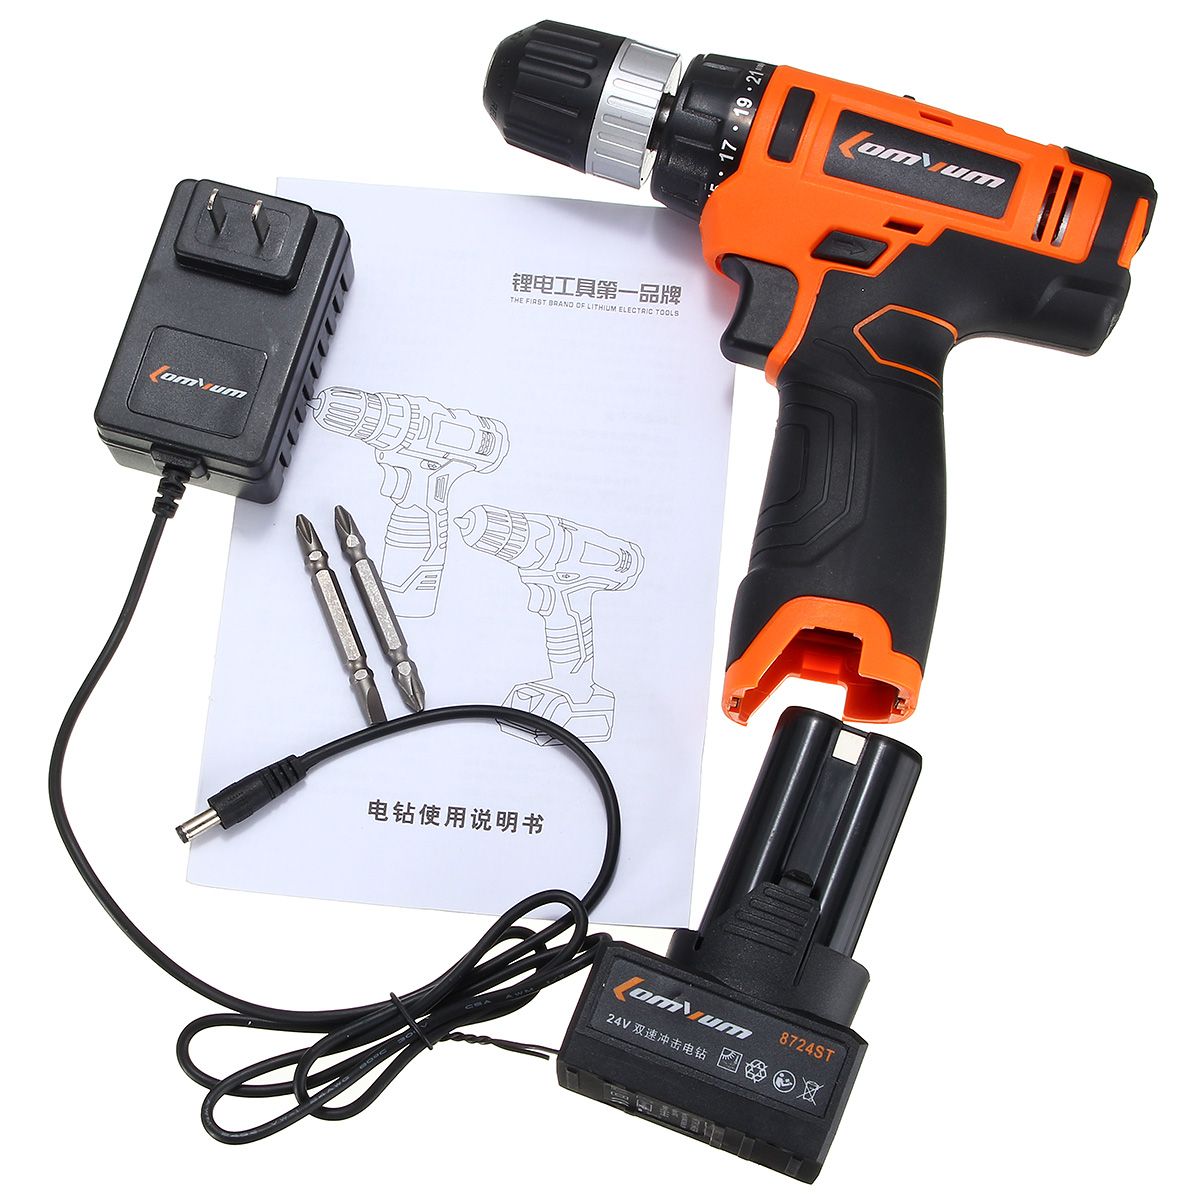 Lomvum-8724S-24V-Electric-Drill-Power-Drill-5060Hz-Two-Speed-Power-Drills-Tool-1130251